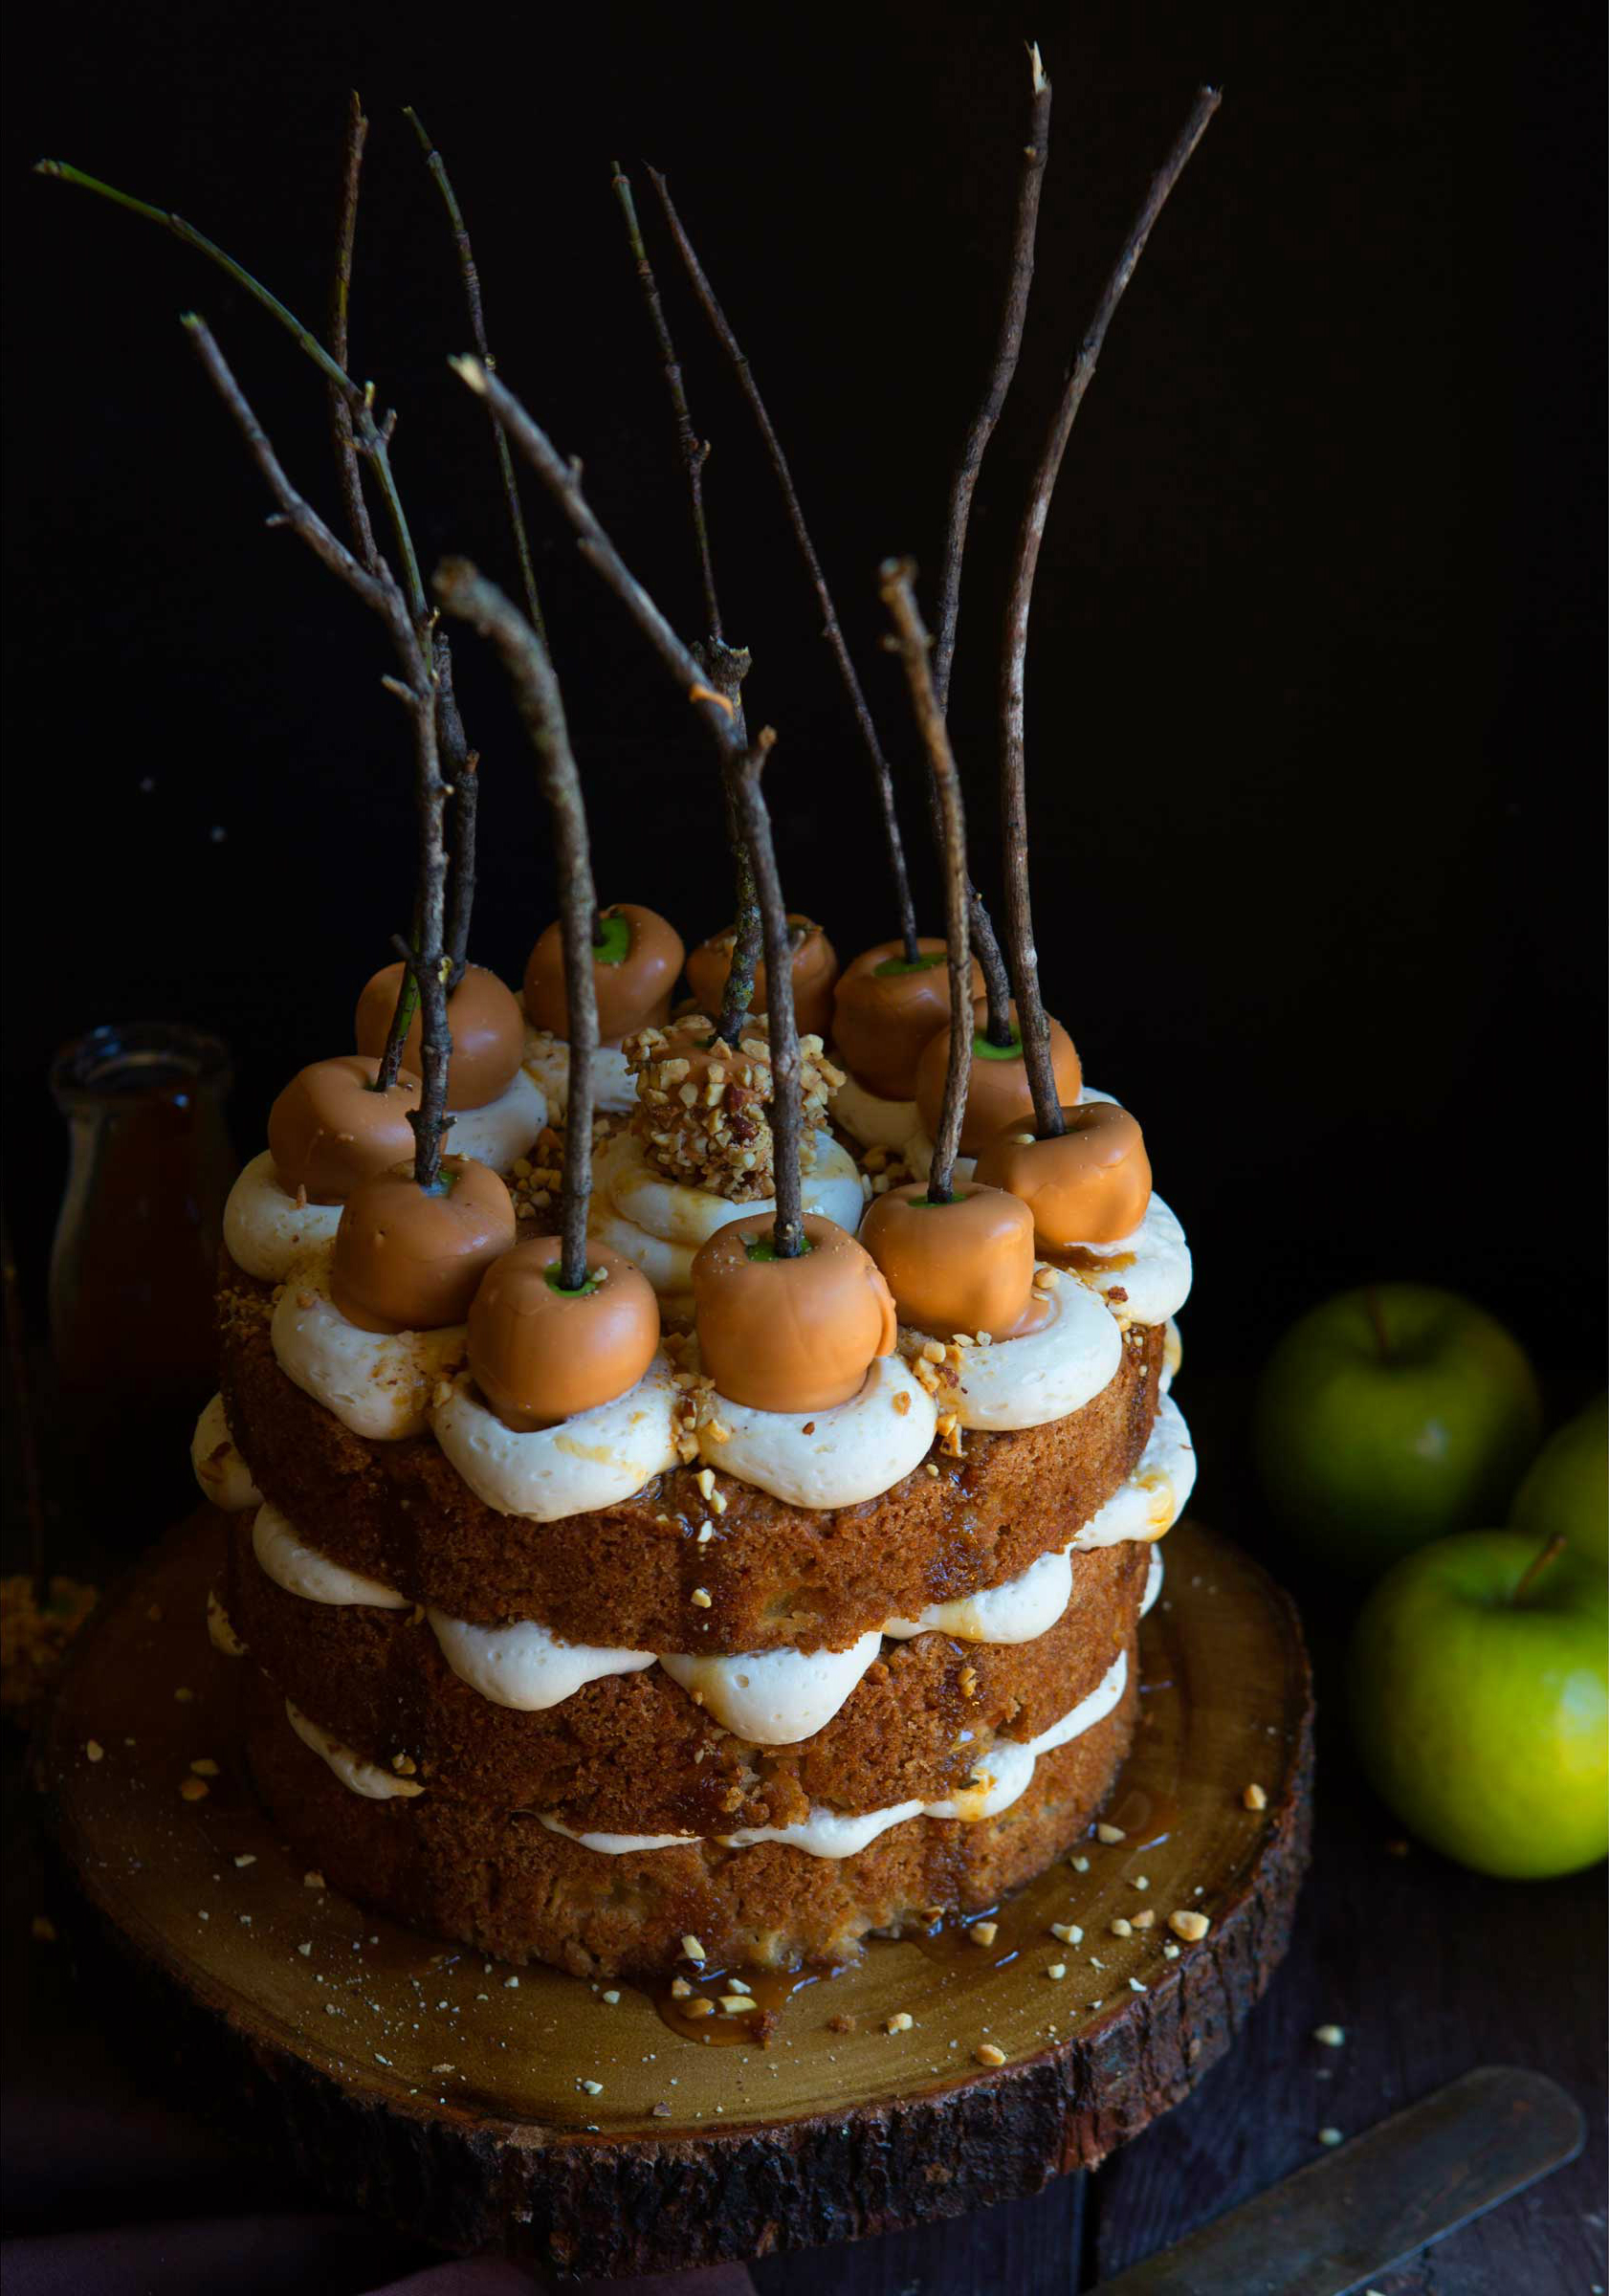 Best Apple Layer Cake Recipe | Country Living